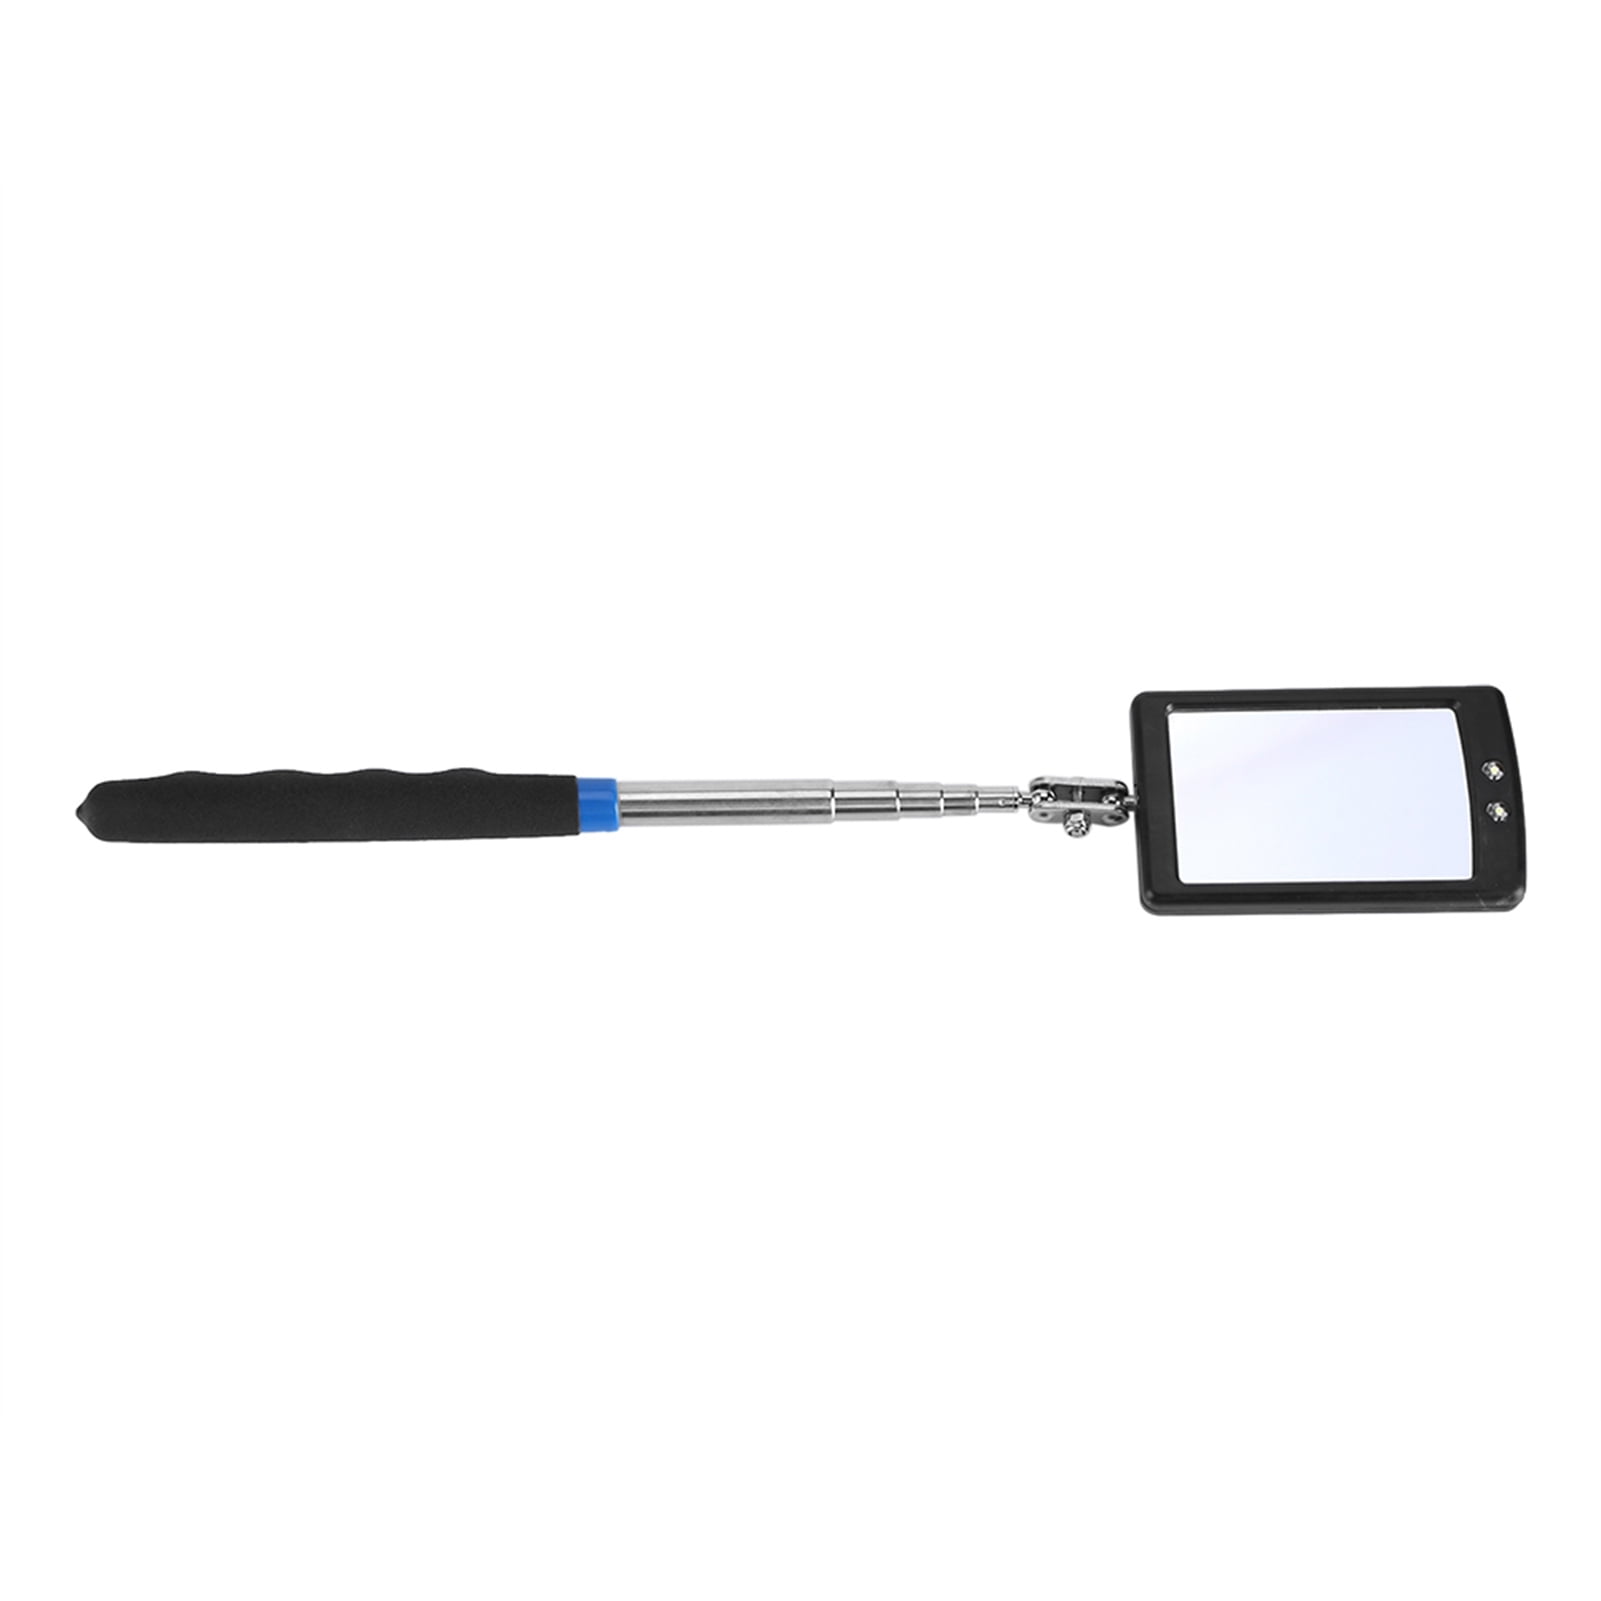 Xtools Telescopic Inspection Mirror with 2 Bright LEDs Extends 29-87cm 